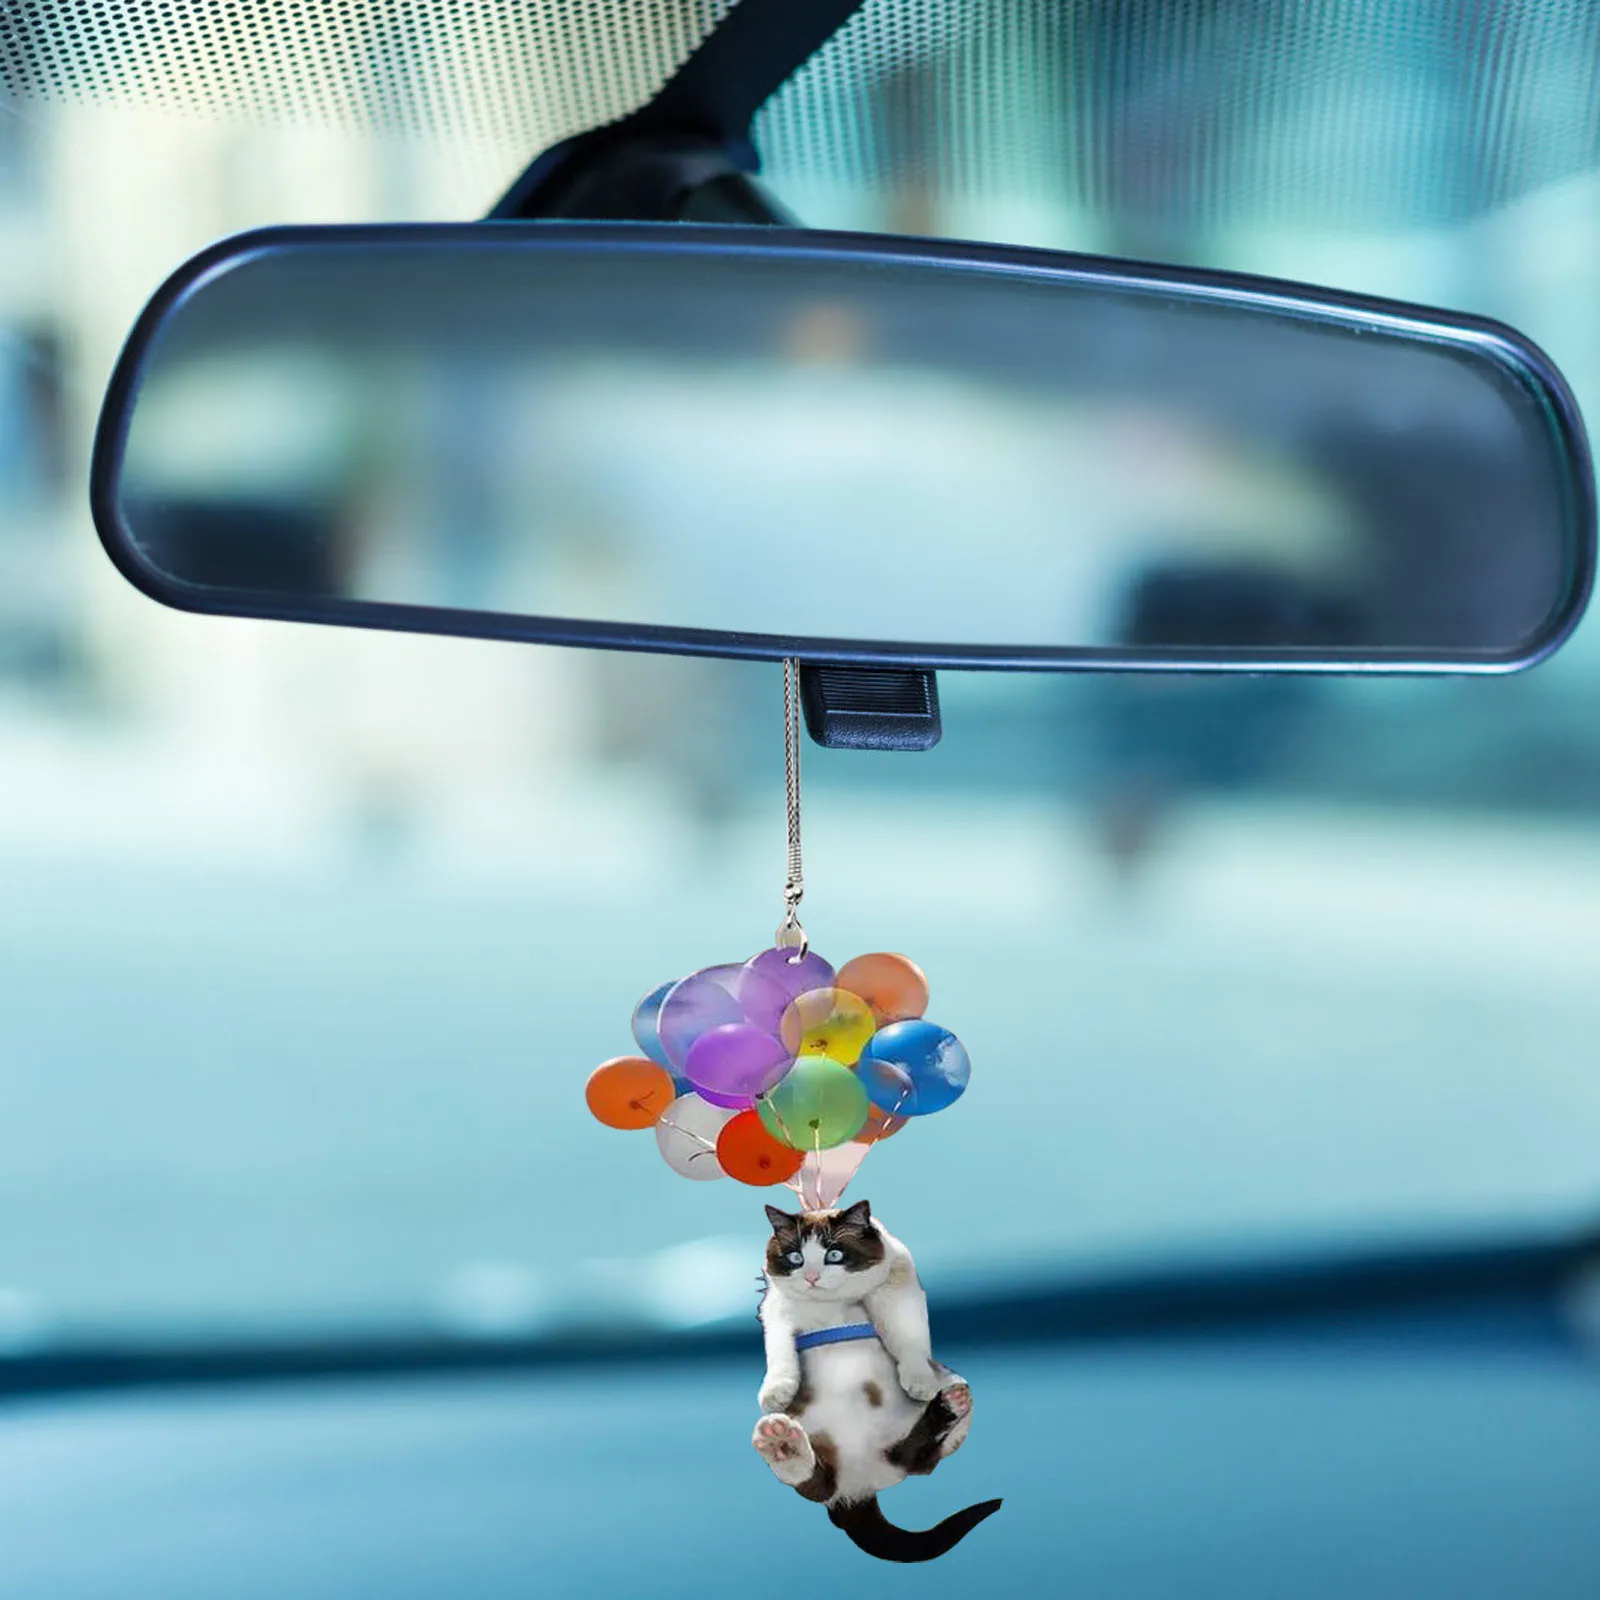 Car Hanging Ornament Ballons Colorful Acrylic Car Rearview Mirror Pendant 